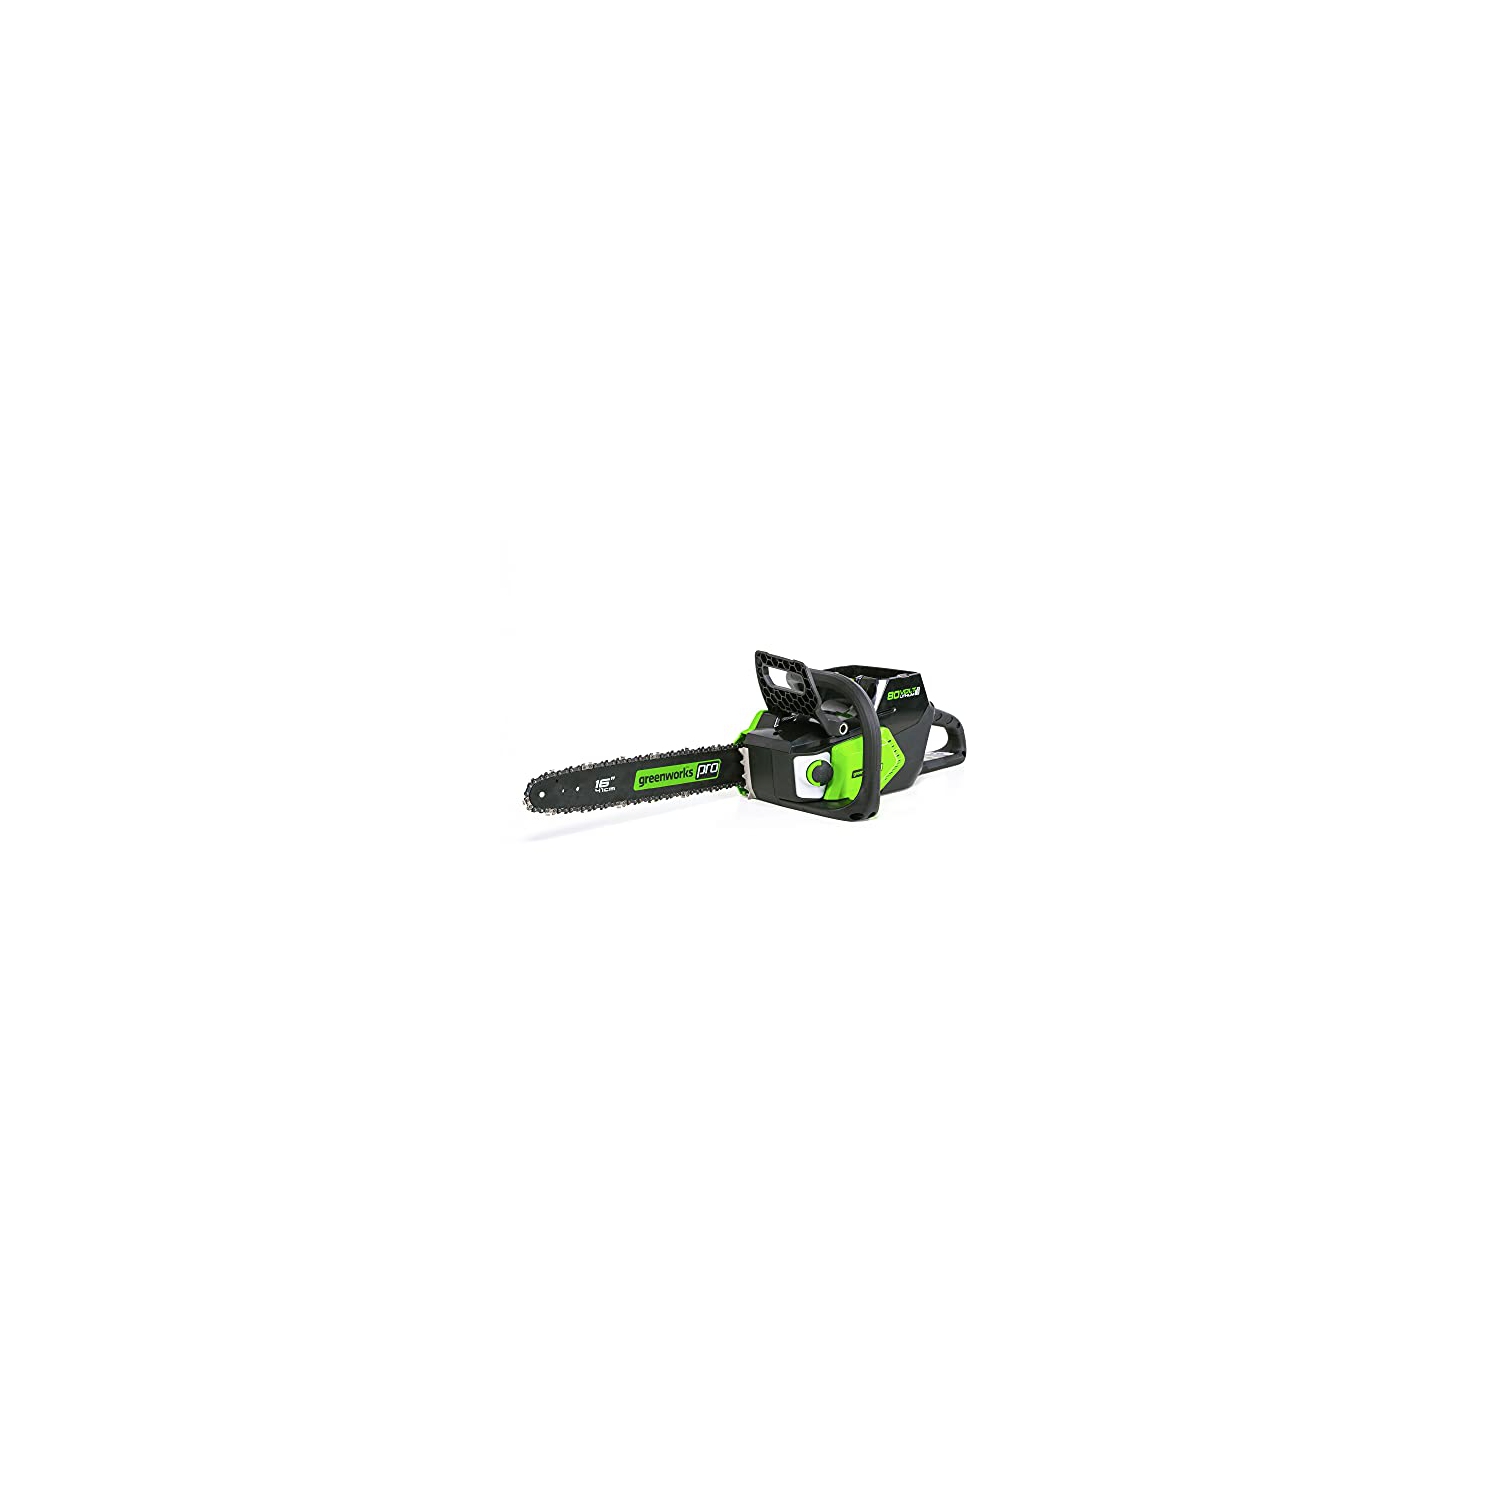 Greenworks Pro 80V 16 inch Cordless Chainsaw, Tool Only, CS80L01